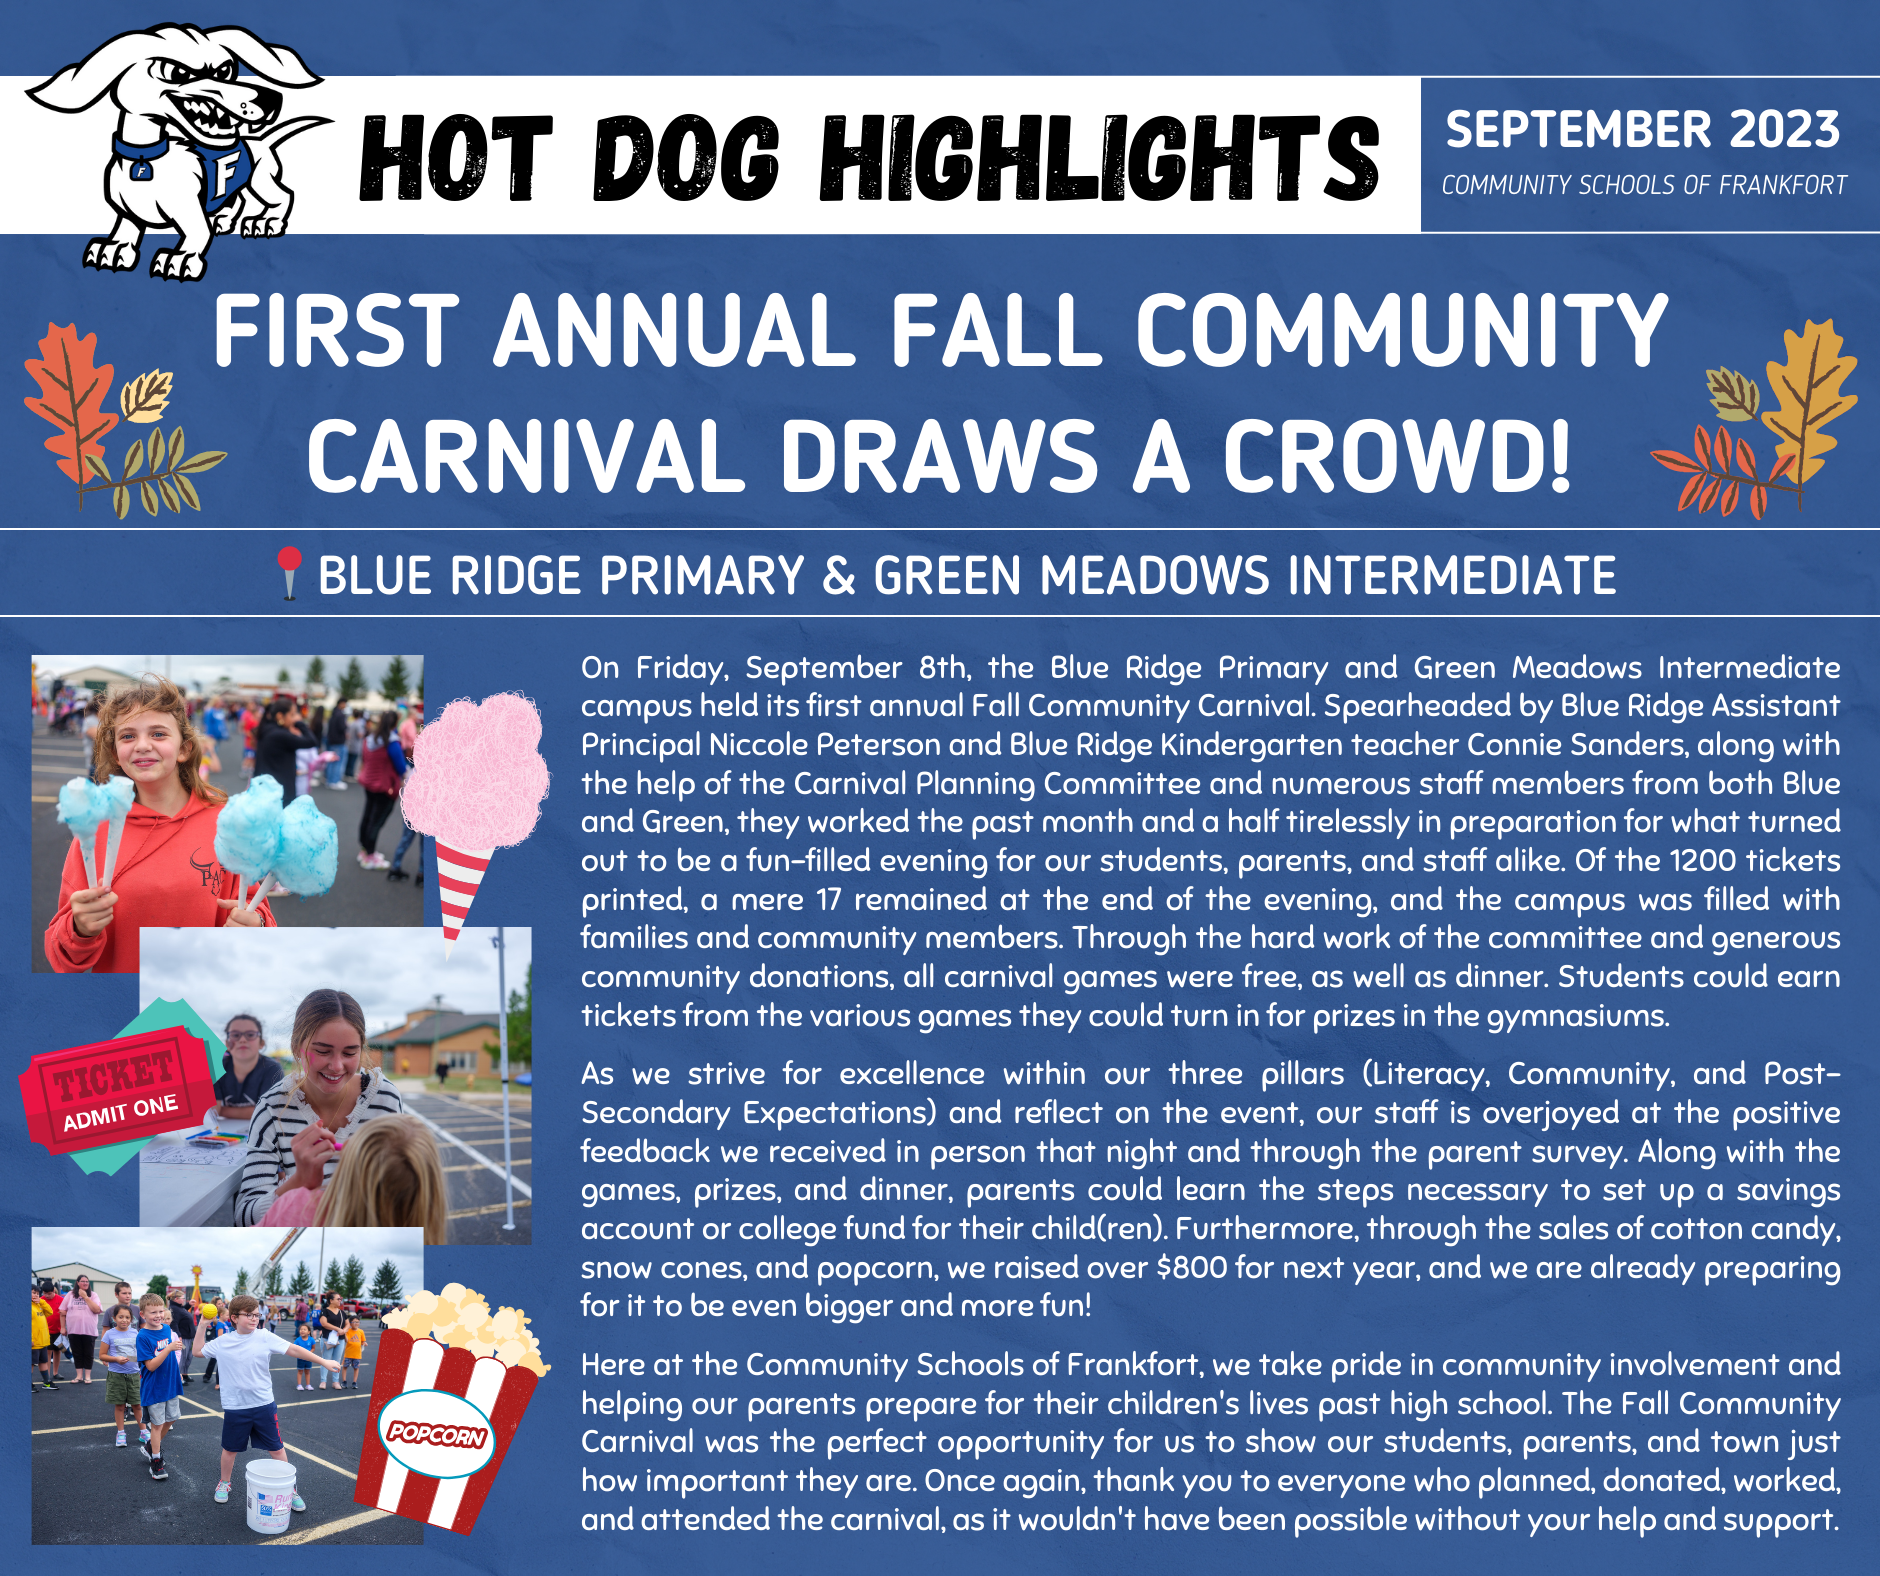 September Hot Dog Highlights article about the Fall Community Carnival at Blue Ridge & Green Meadows.